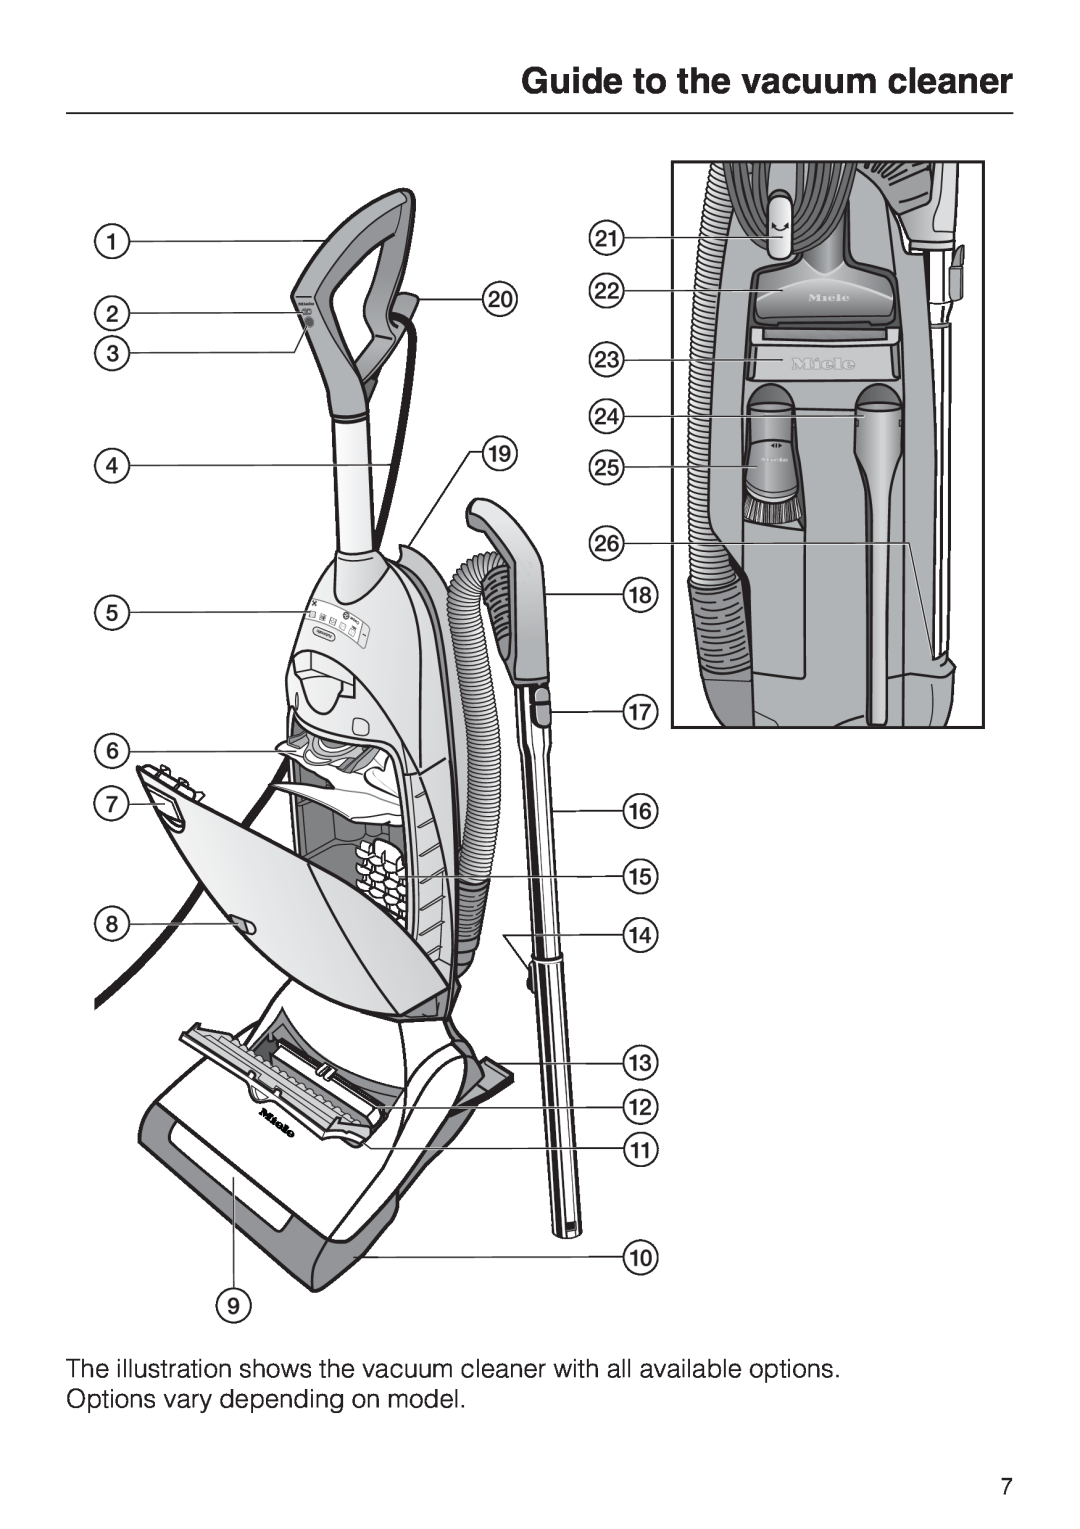 Miele S 7000 operating instructions Guide to the vacuum cleaner 